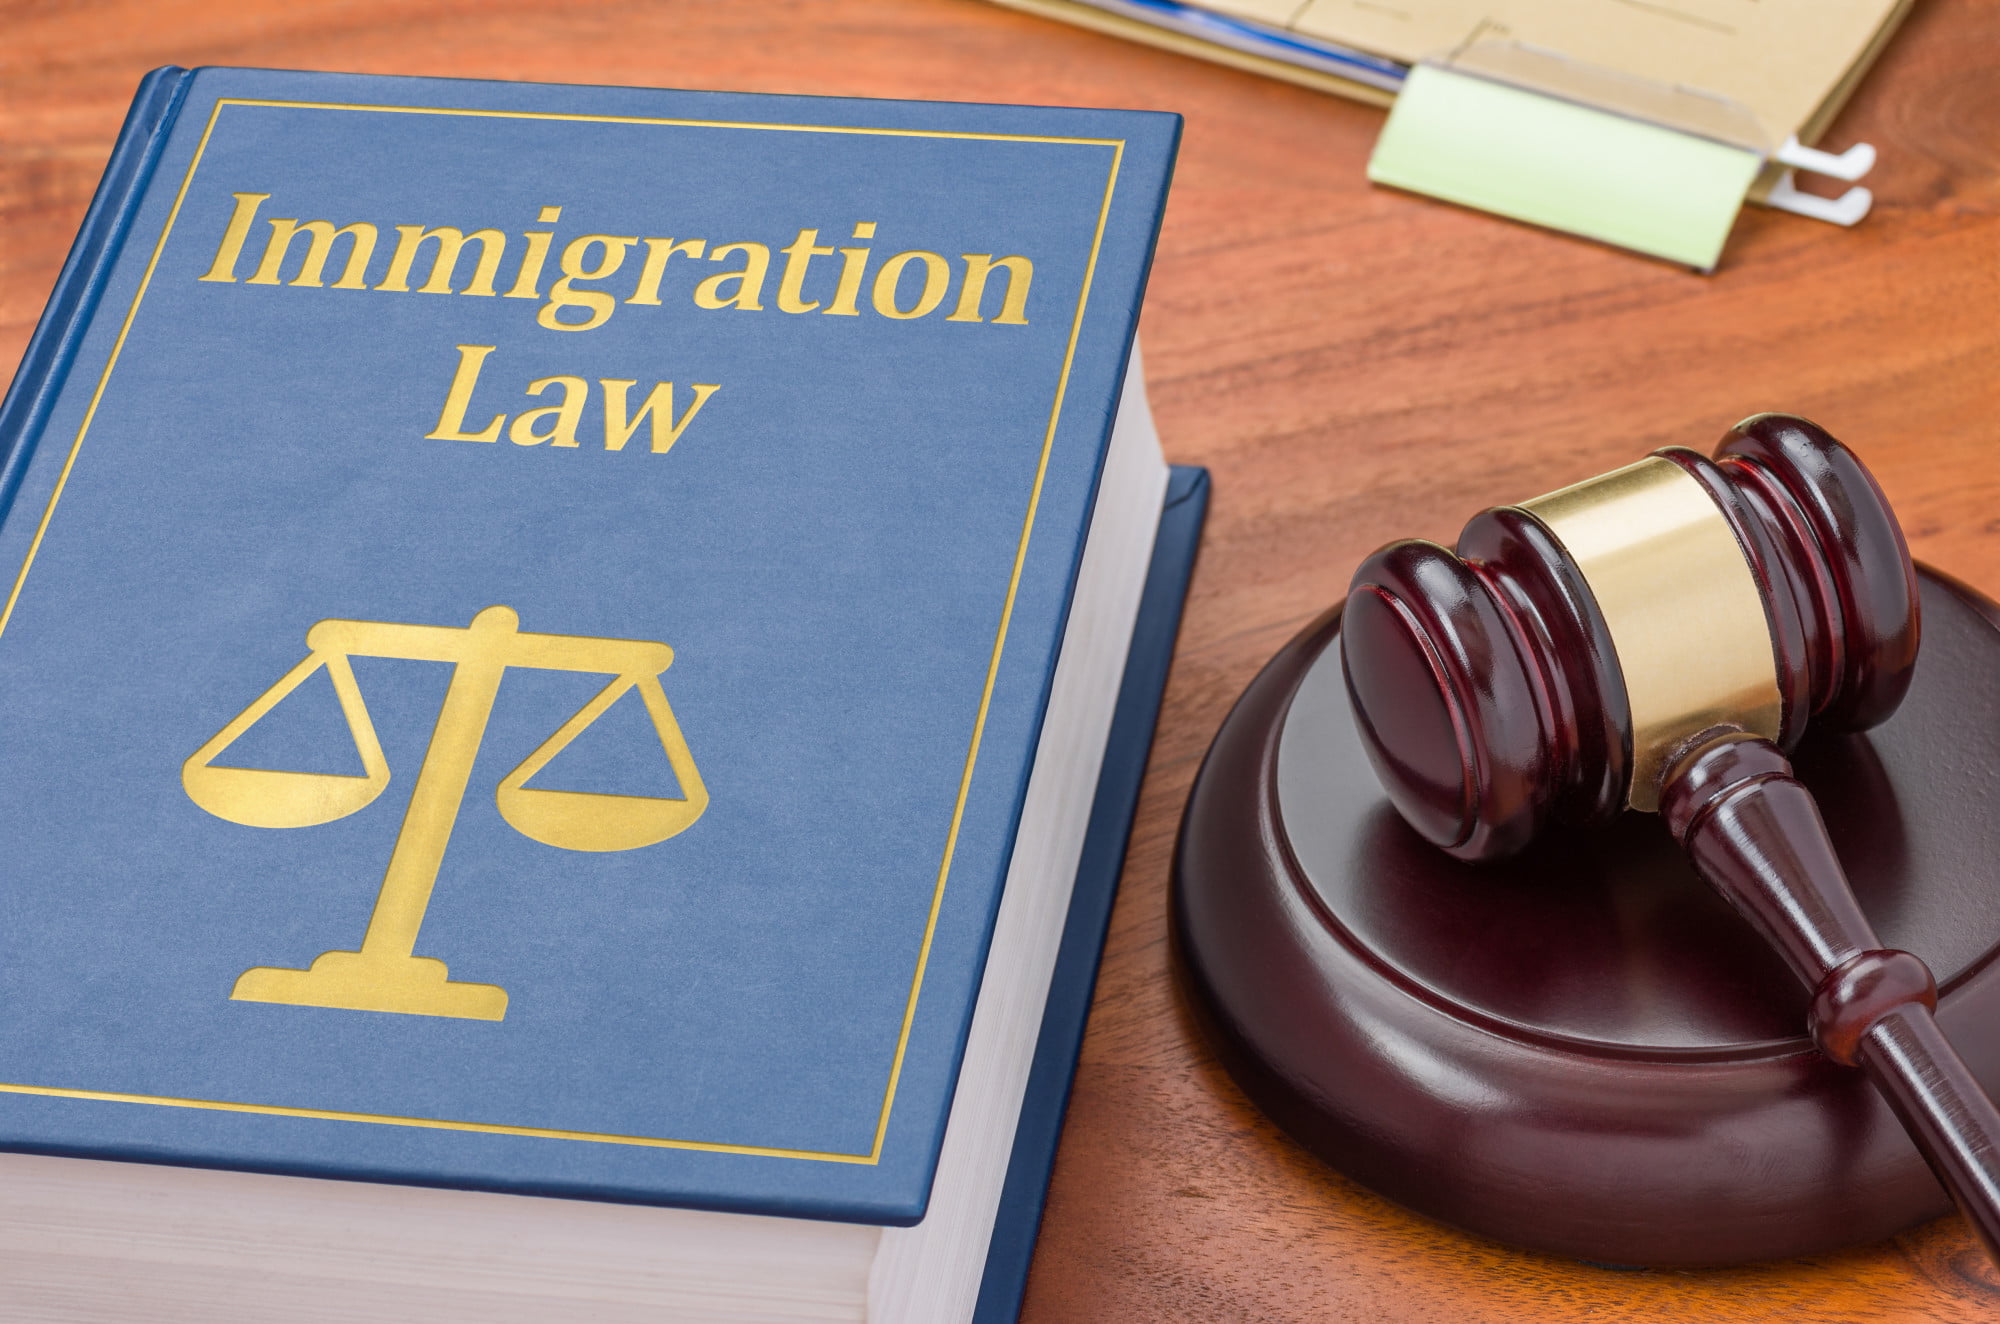 Getting an immigration lawyer can be super important depending on your circumstance. Here are 3 reasons you should absolutely hire an immigration lawyer.